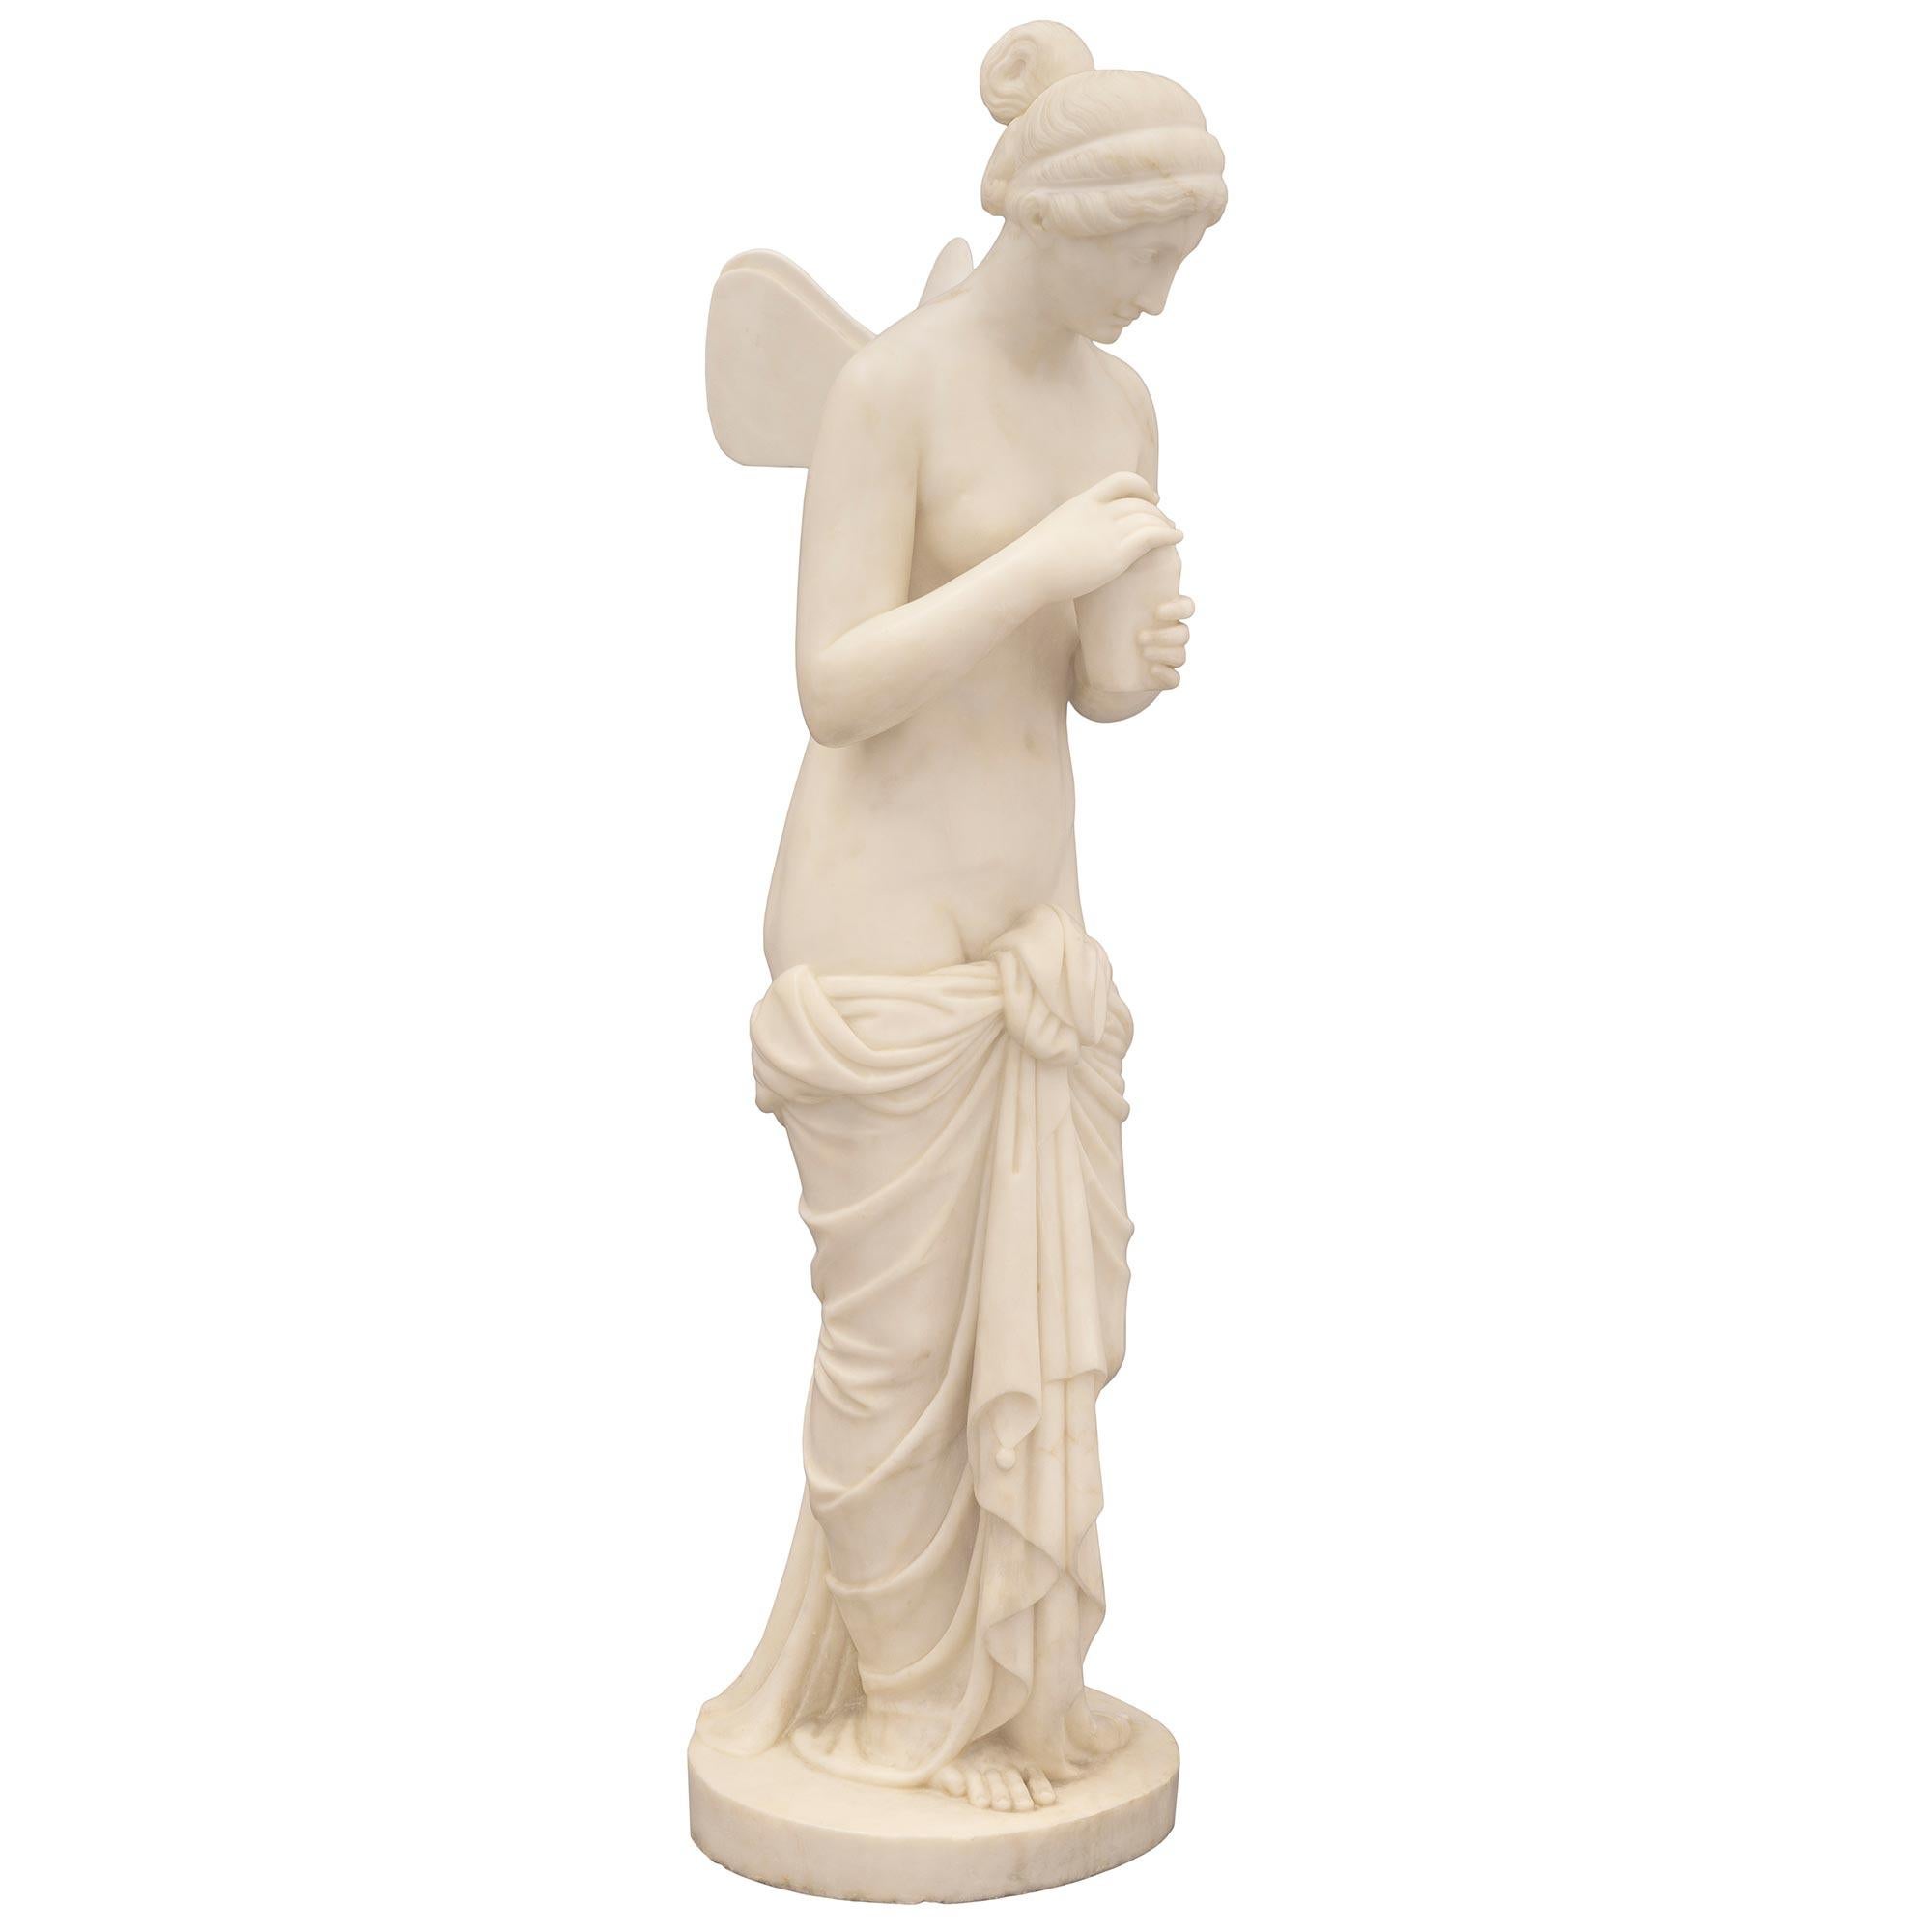 A beautiful and very high quality Italian 19th century solid white Carrara marble statue of Psyche. The statue is raised by a circular base where the beautiful Psyche is standing. She is draped in a wonderfully executed and intricately detailed